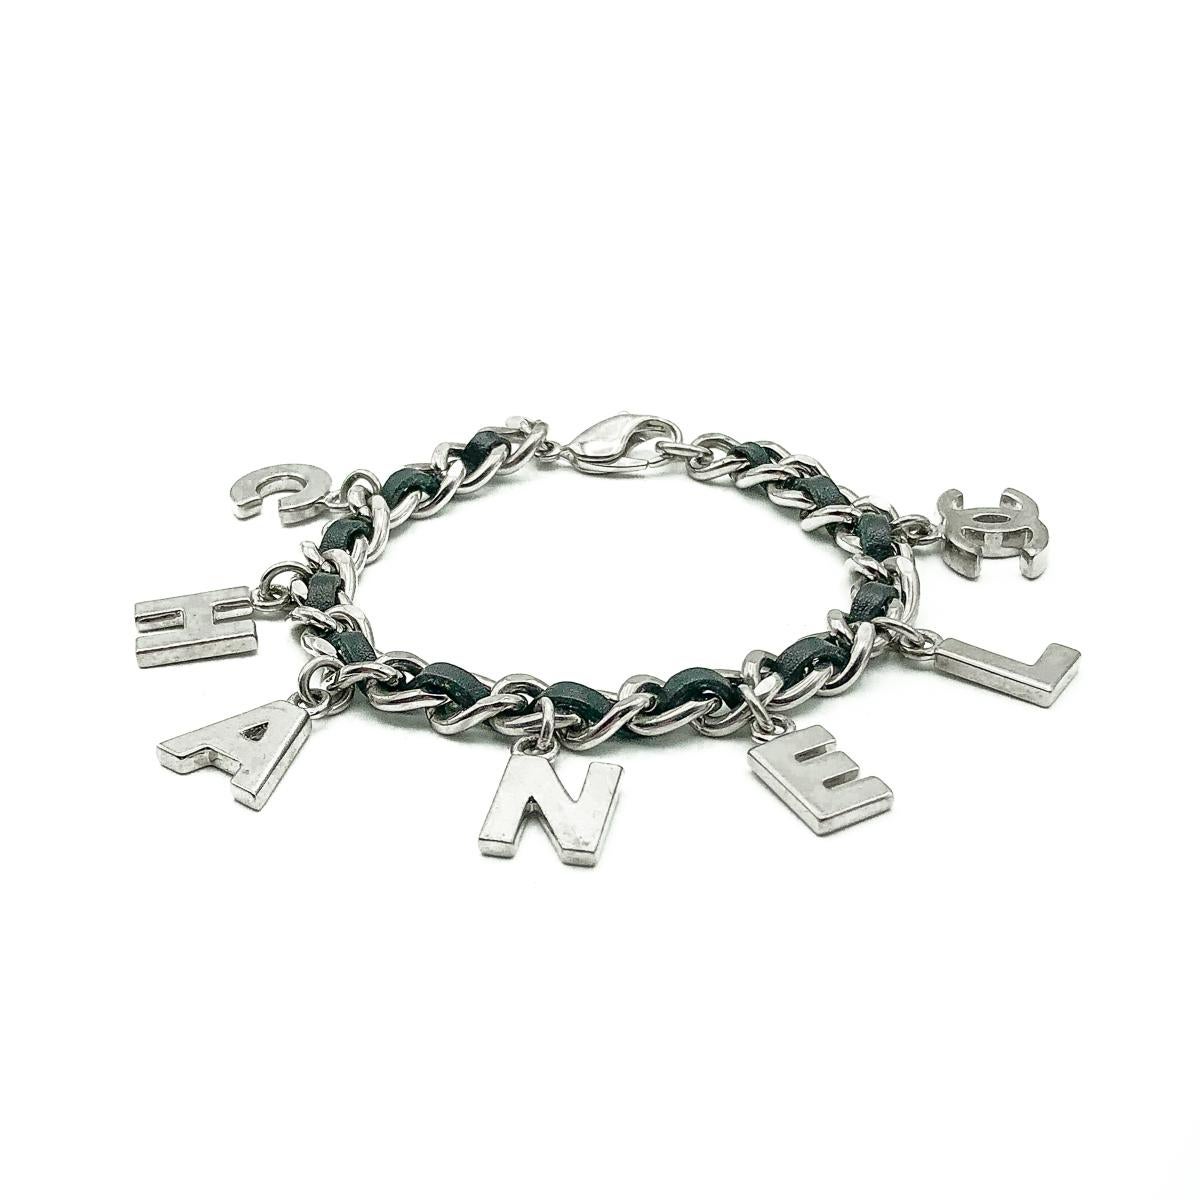 An ultra cool Chanel Letter Charm Bracelet from 2004. Crafted in rhodium plated metal and leather. Featuring a chunky flattened curb link chain threaded with soft black leather. The letter charms spelling out C H A N E L alongside the iconic